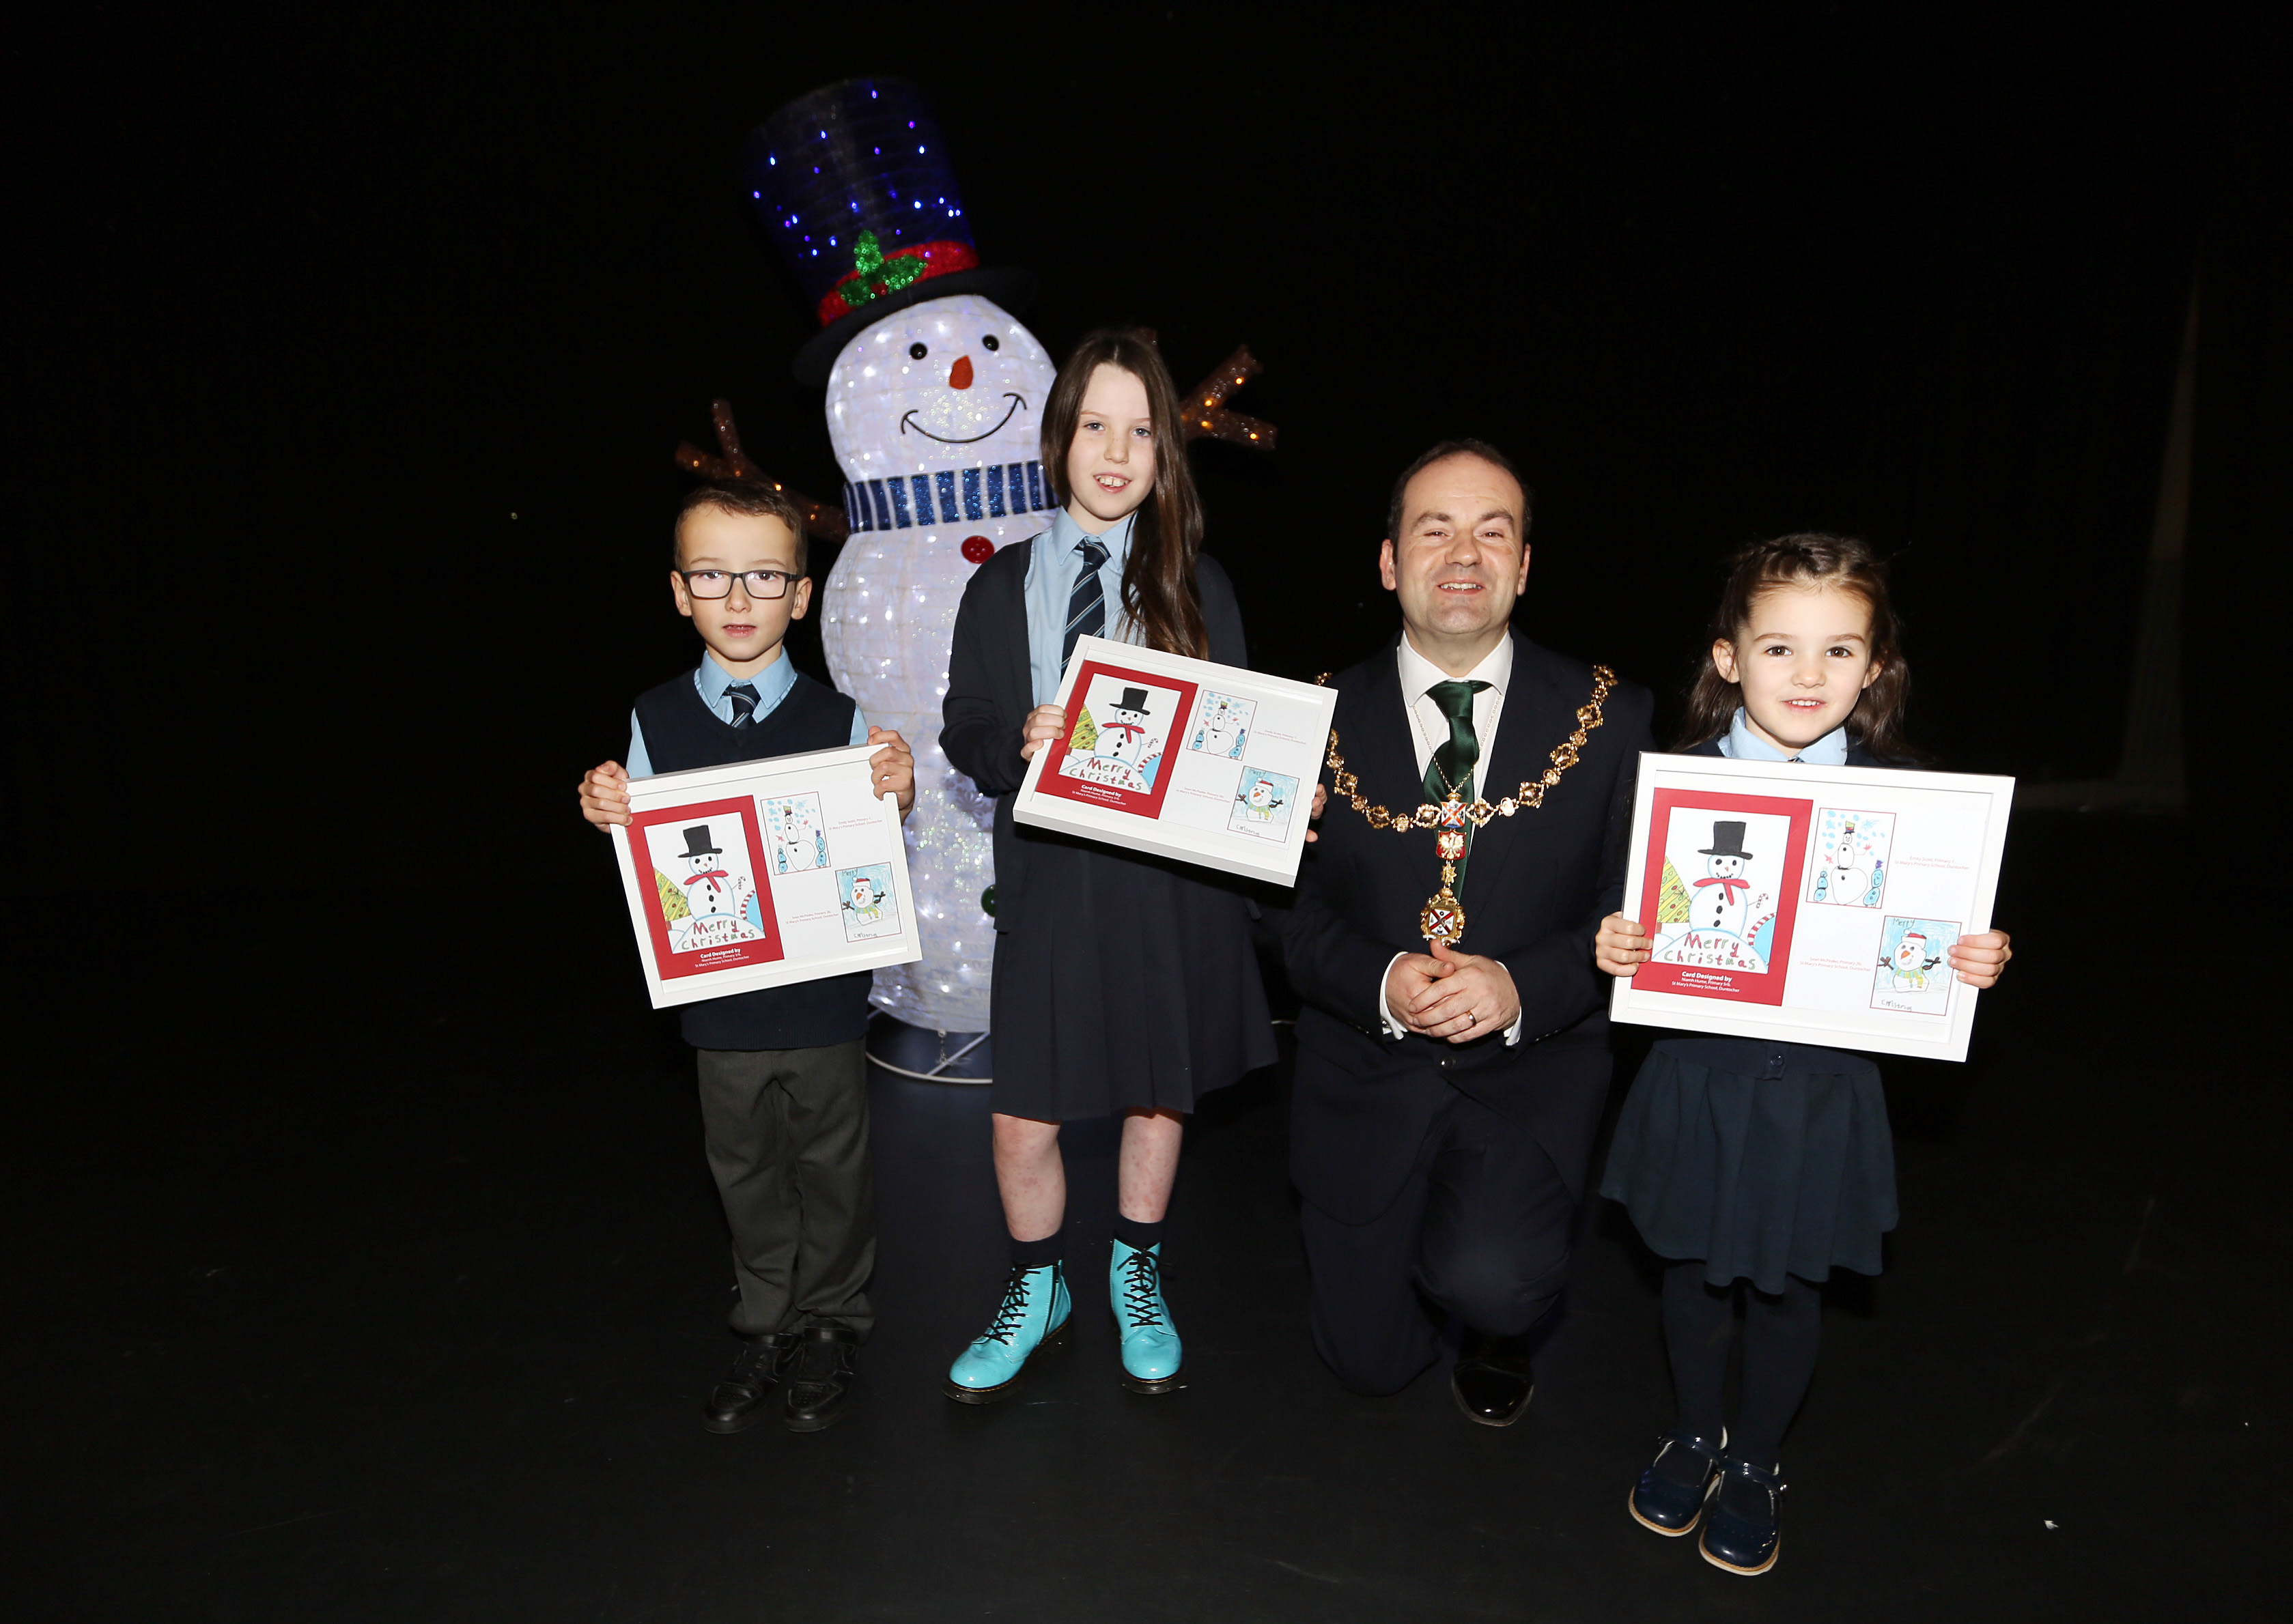 A festive drawing of a snowman created by a Clydebank school pupil has been chosen as the winner of the Provost’s 2022 Christmas card competition.